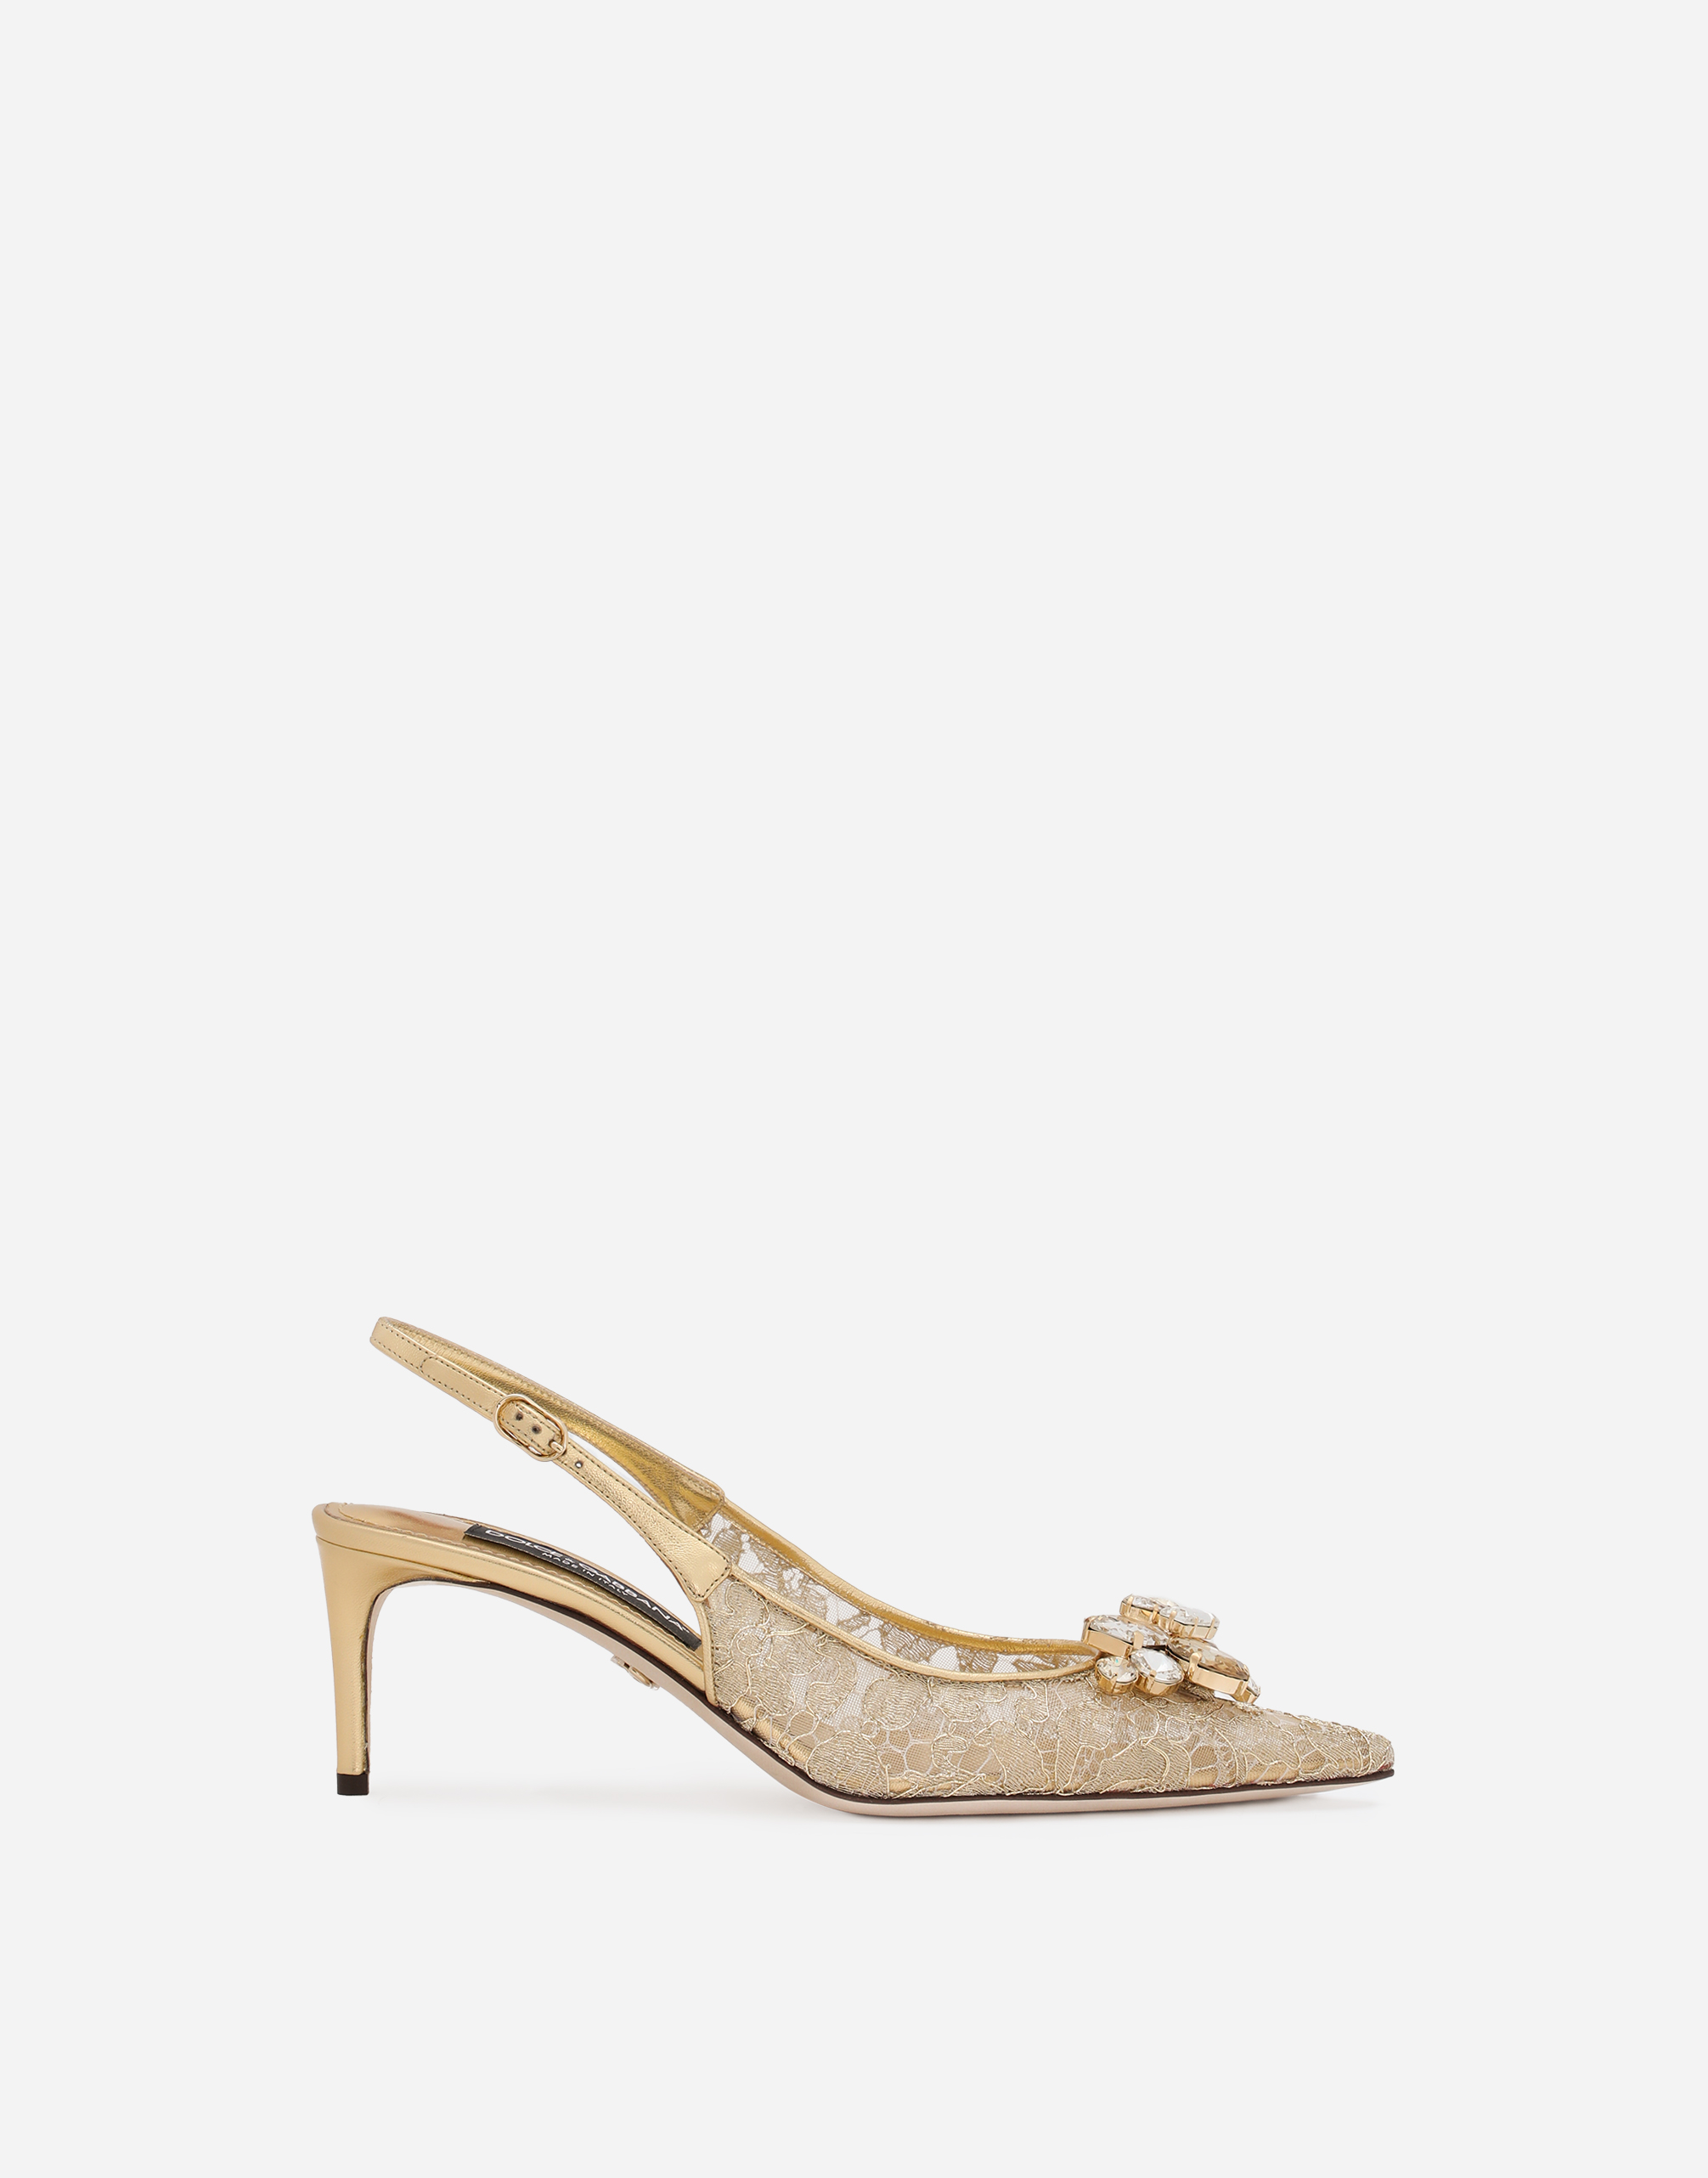 Dolce & Gabbana Rainbow Lace Slingbacks In Lurex Lace In Gold